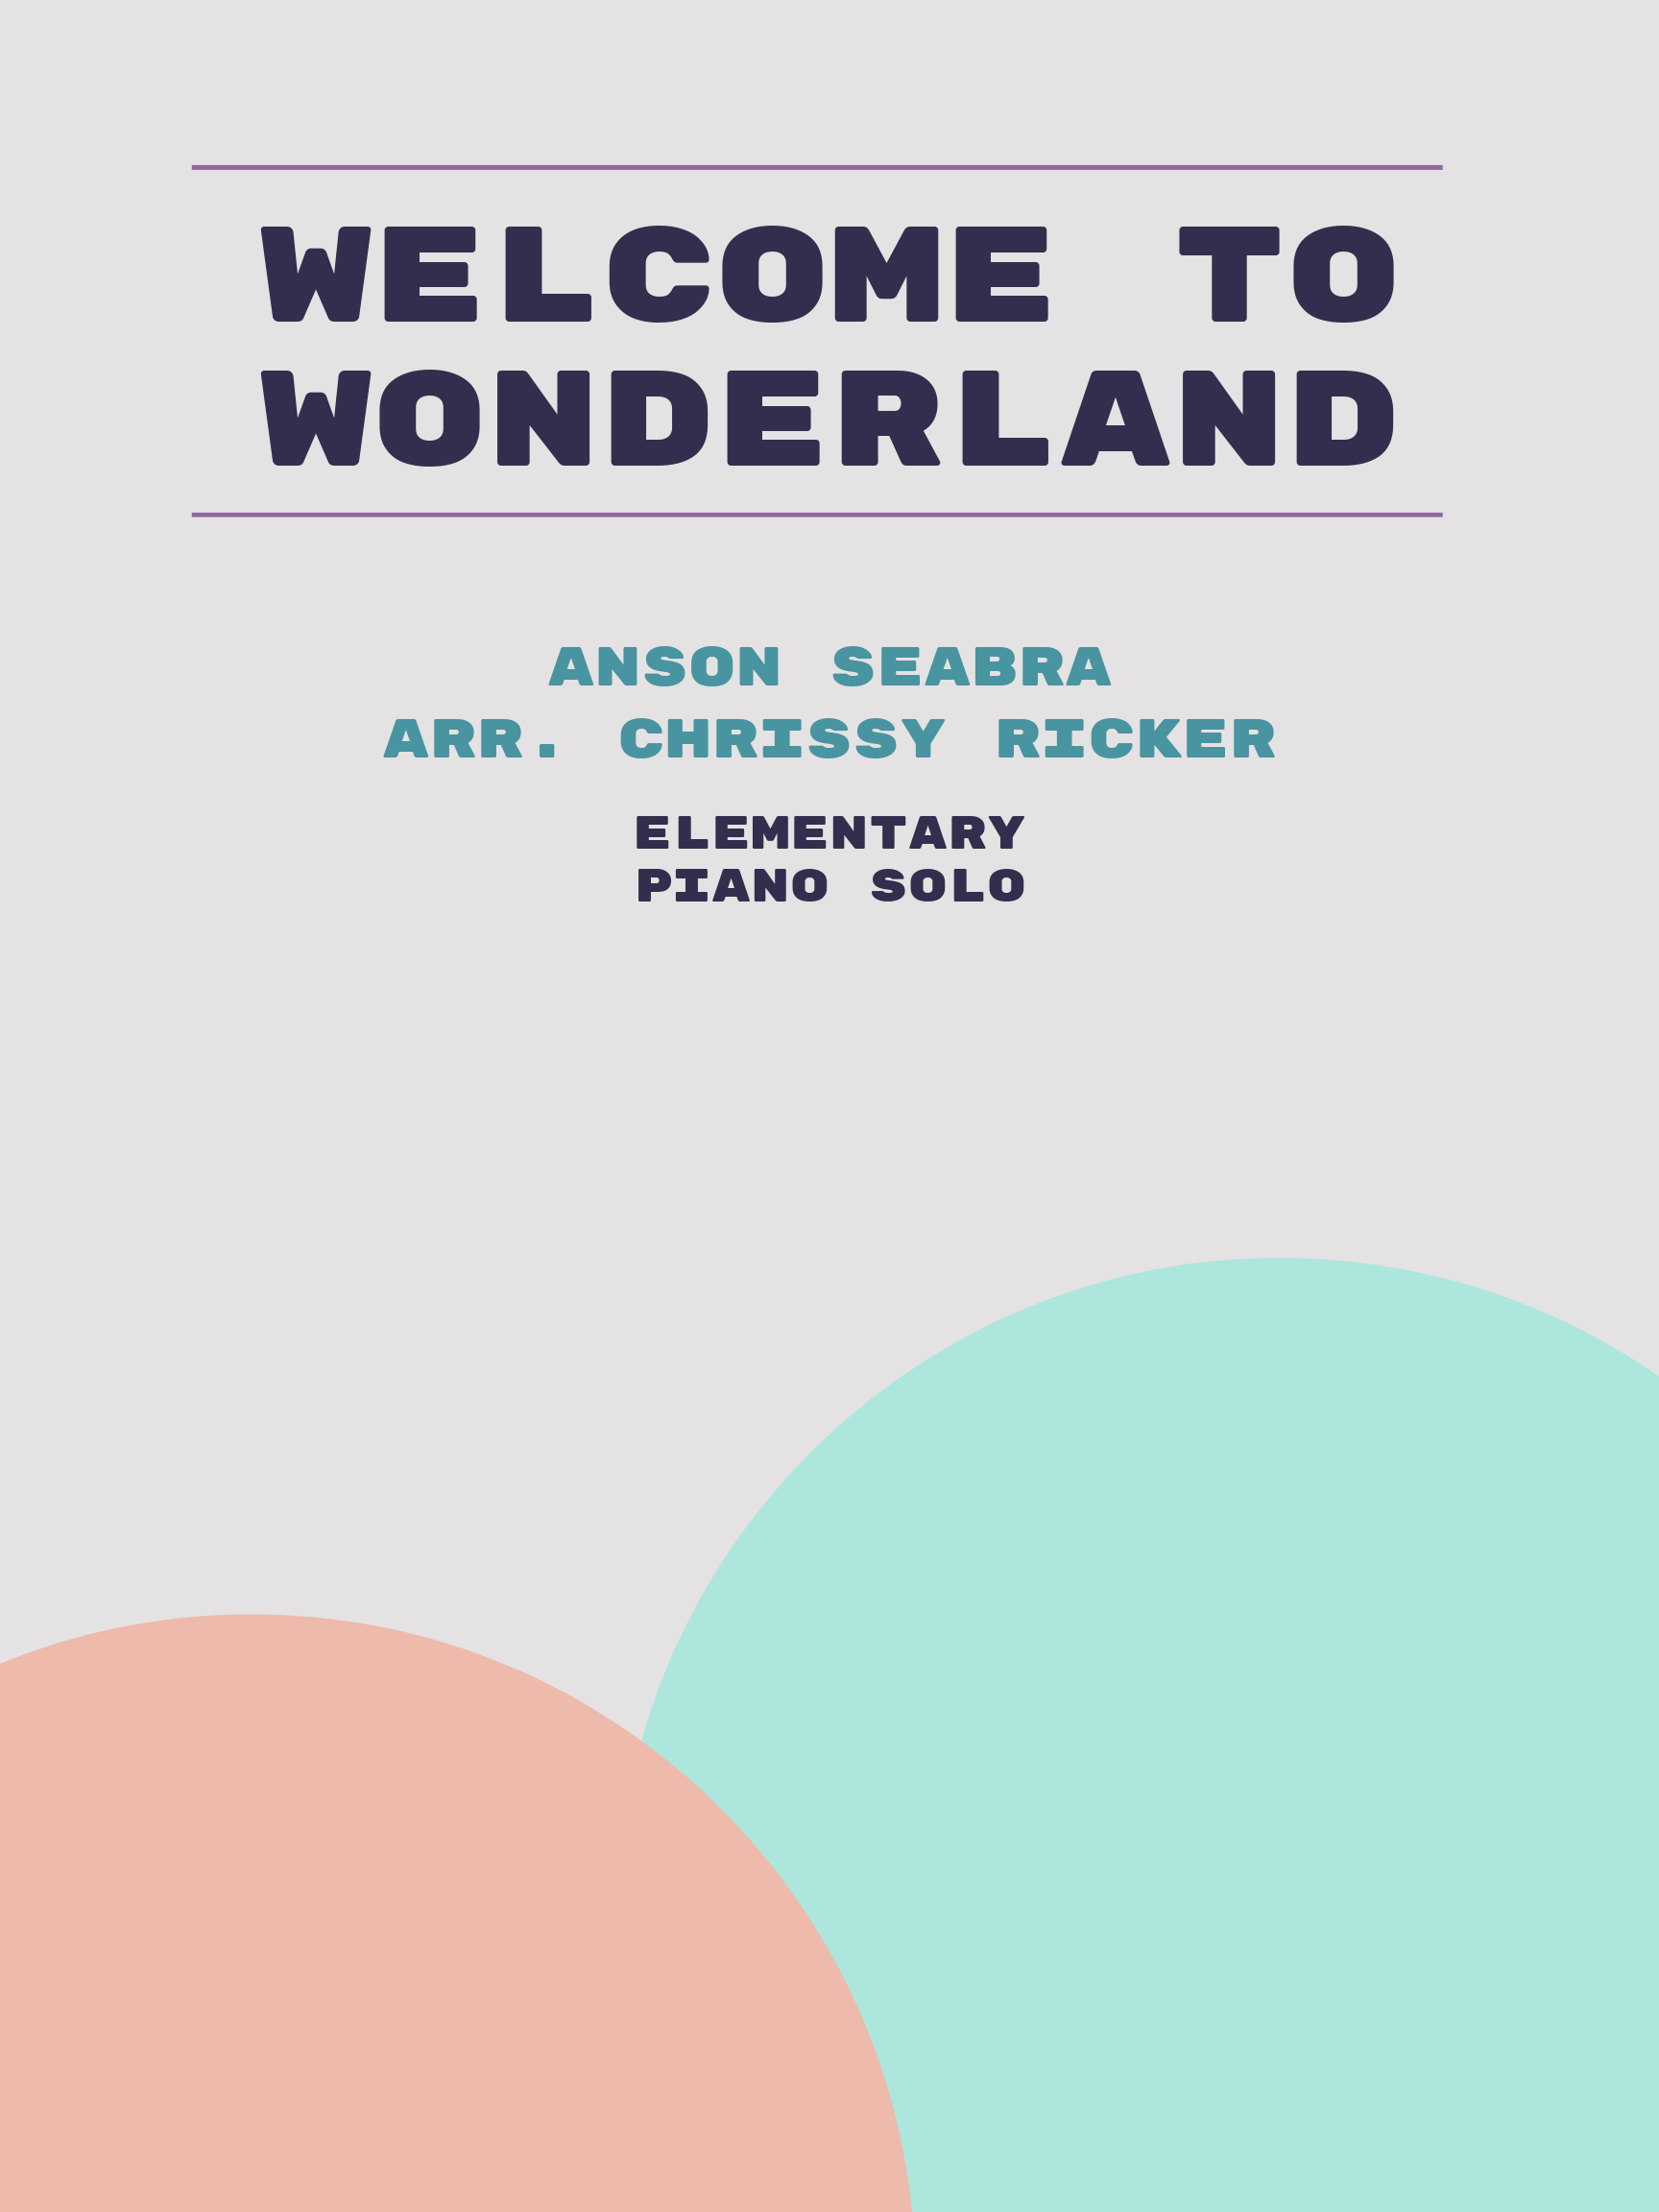 Welcome to Wonderland by Anson Seabra